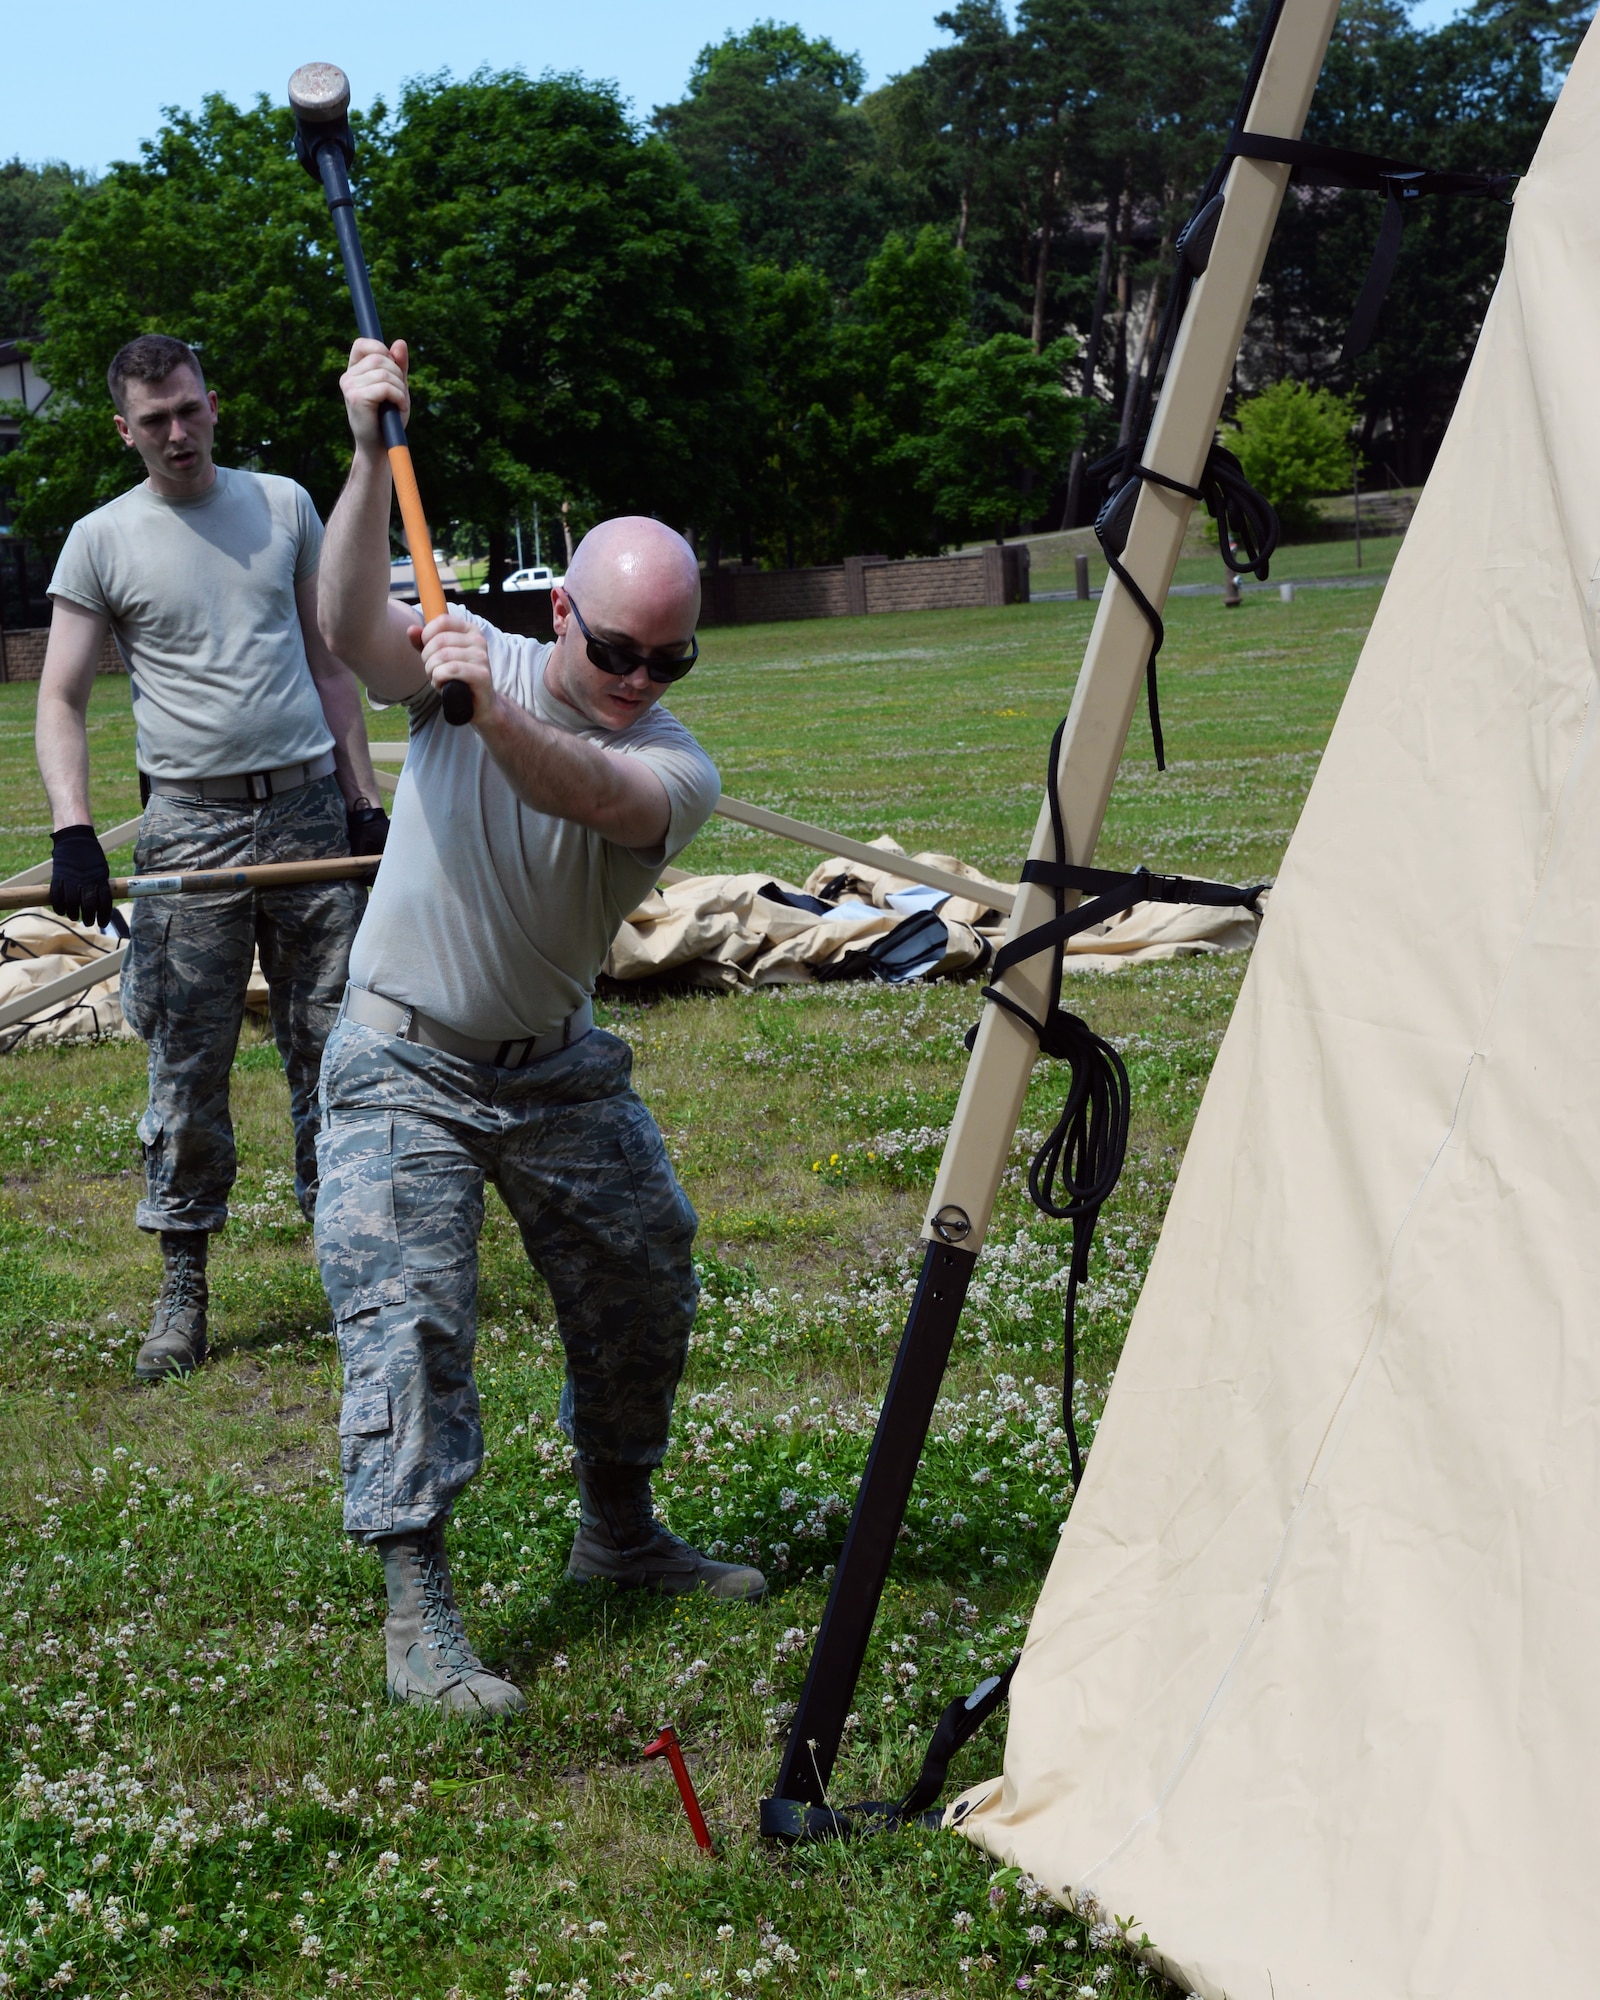 Airmen from the 86th Medical Group and the 86th Logistics Squadron set up an Expeditionary Medical Support System modular field hospital during en route patient staging training during Exercise Maroon Surge on Ramstein Air Base, Germany, June 4, 2018. EMEDS have a scalable design that allows the Air Force to deploy them in configurations that support small teams supporting a limited number of casualties, to large medical systems offering specialized care. (U.S. Air Force photo by Airman 1st Class Ariel Leighty)